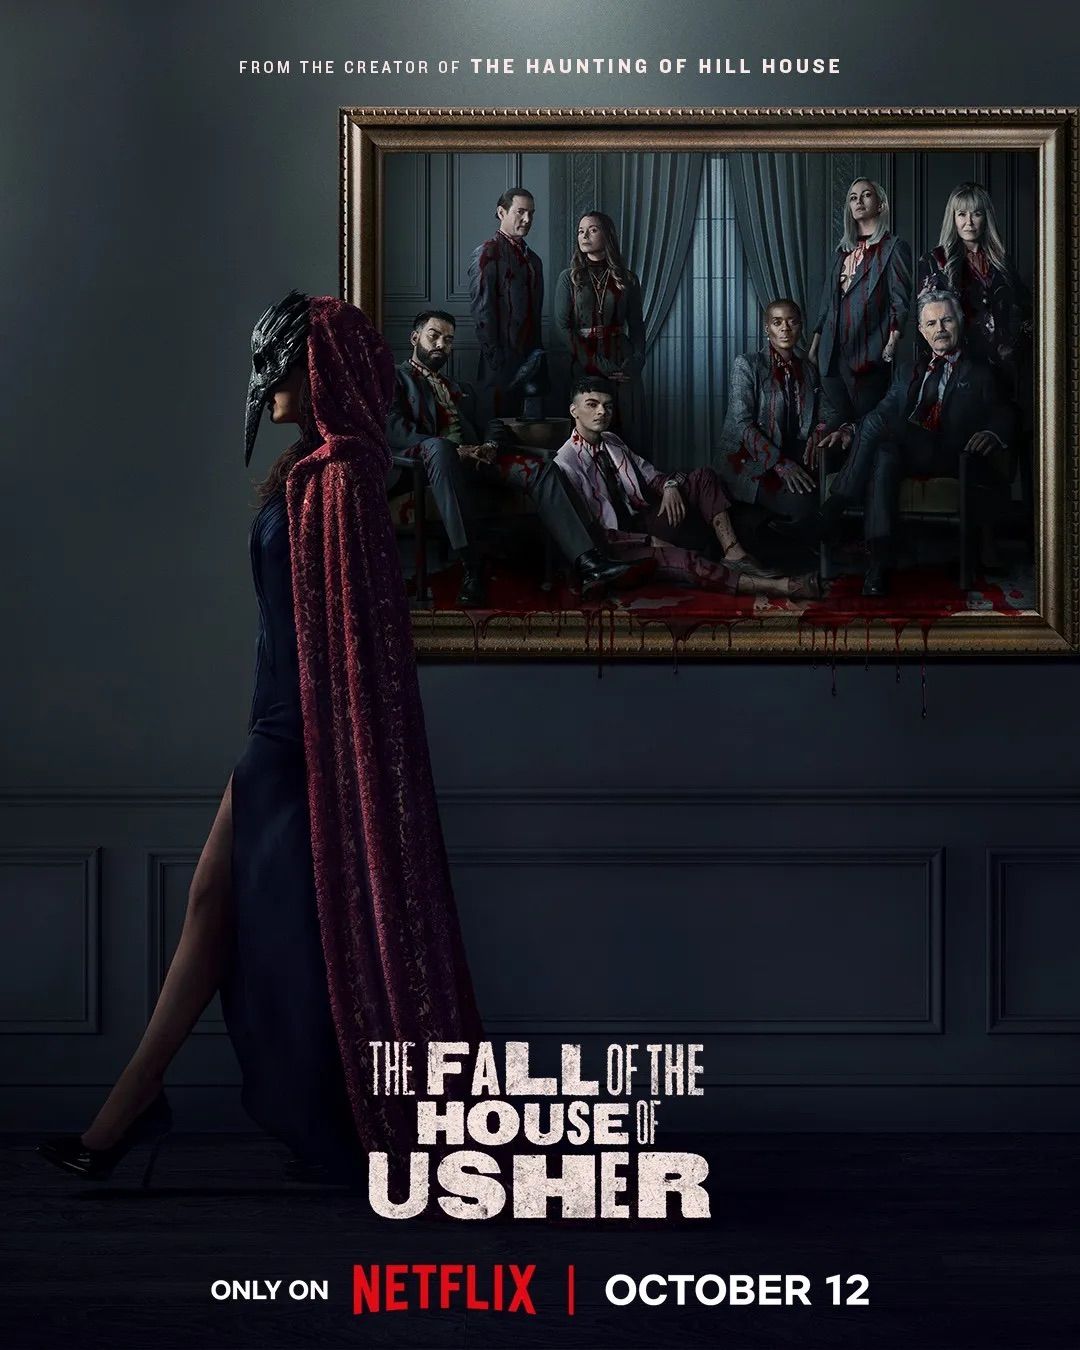 Fall of the House of Usher Poster featuring Mary McDonnell, Bruce Greenwood, Carla Gugino, and more